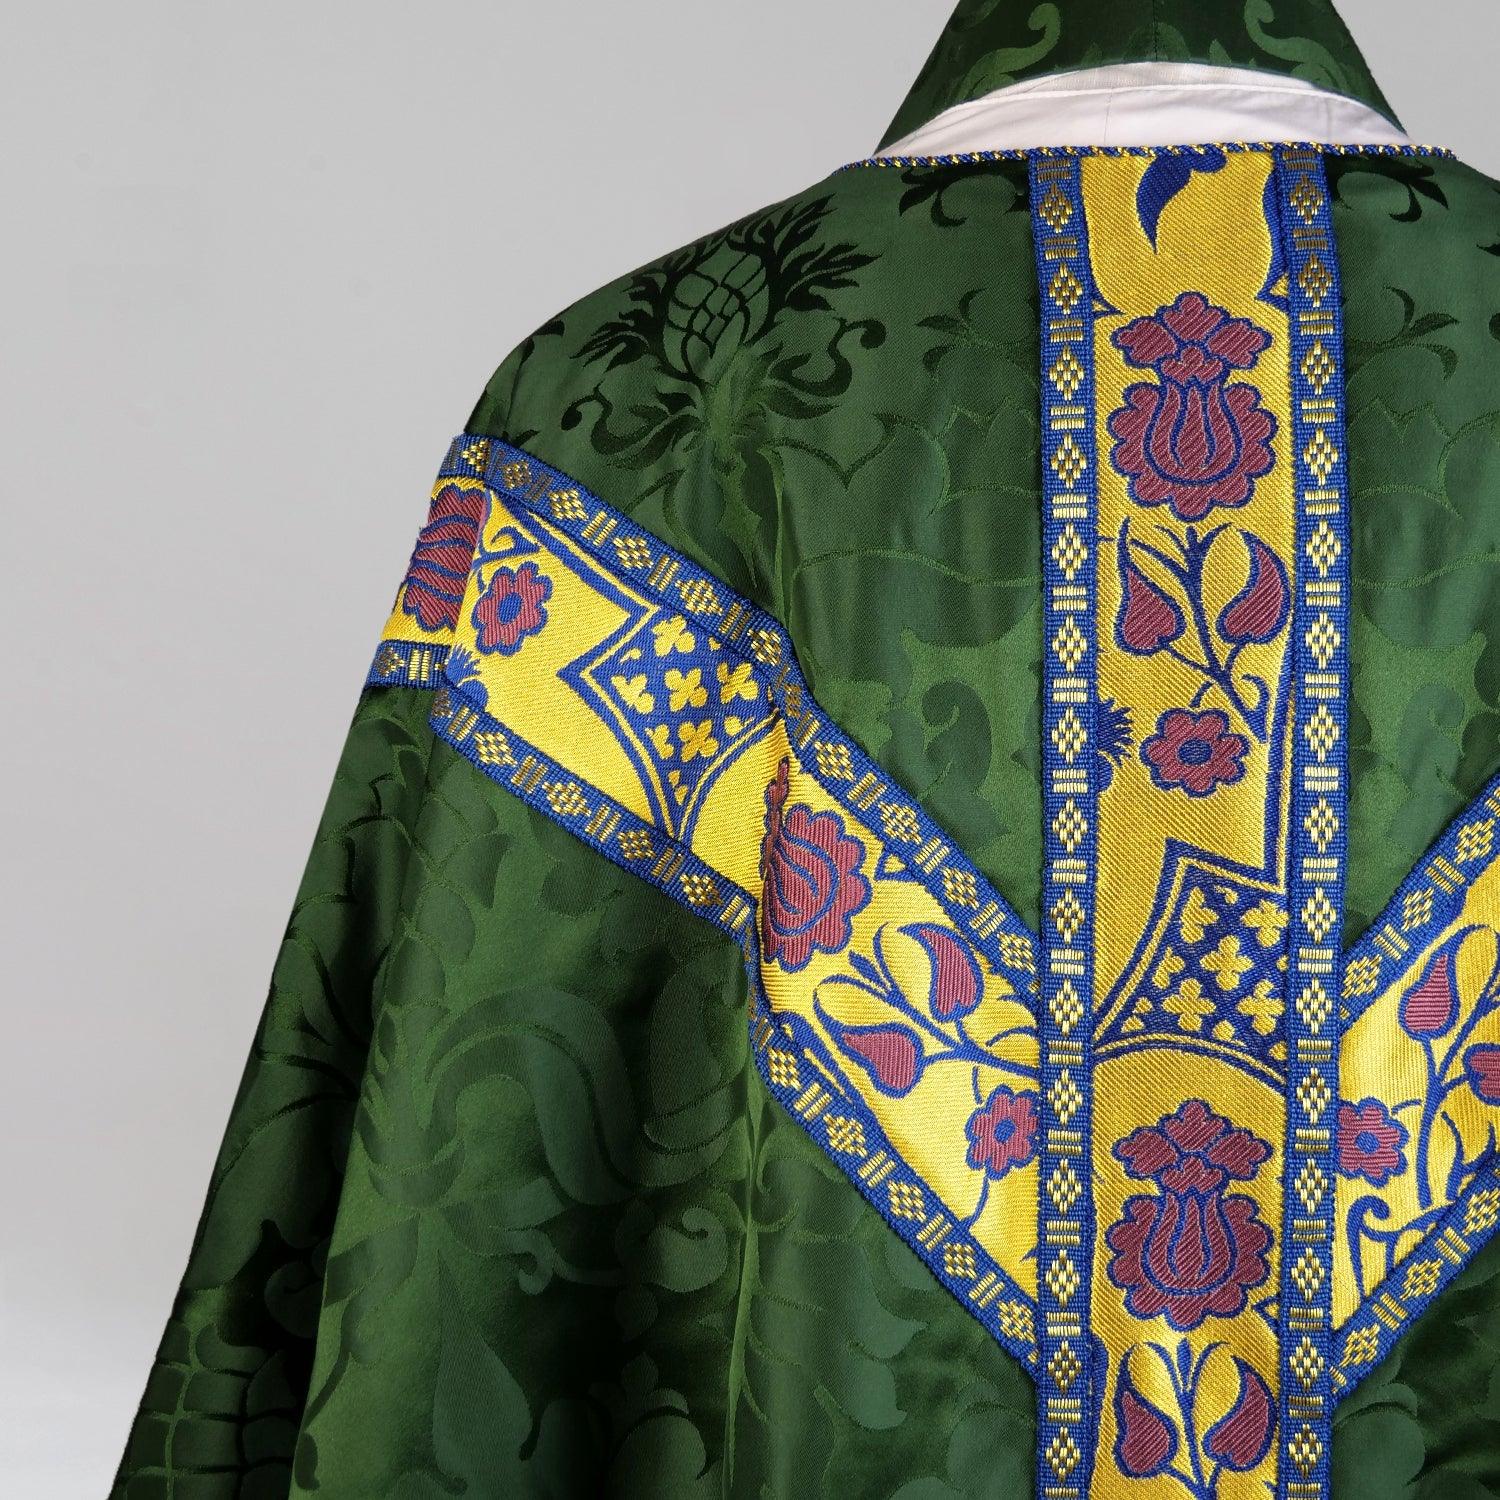 Full Gothic Chasuble in Green 'Bellini' with Gold/Blue/Purple 'Comper Strawberry' Orphreys - Watts & Co.